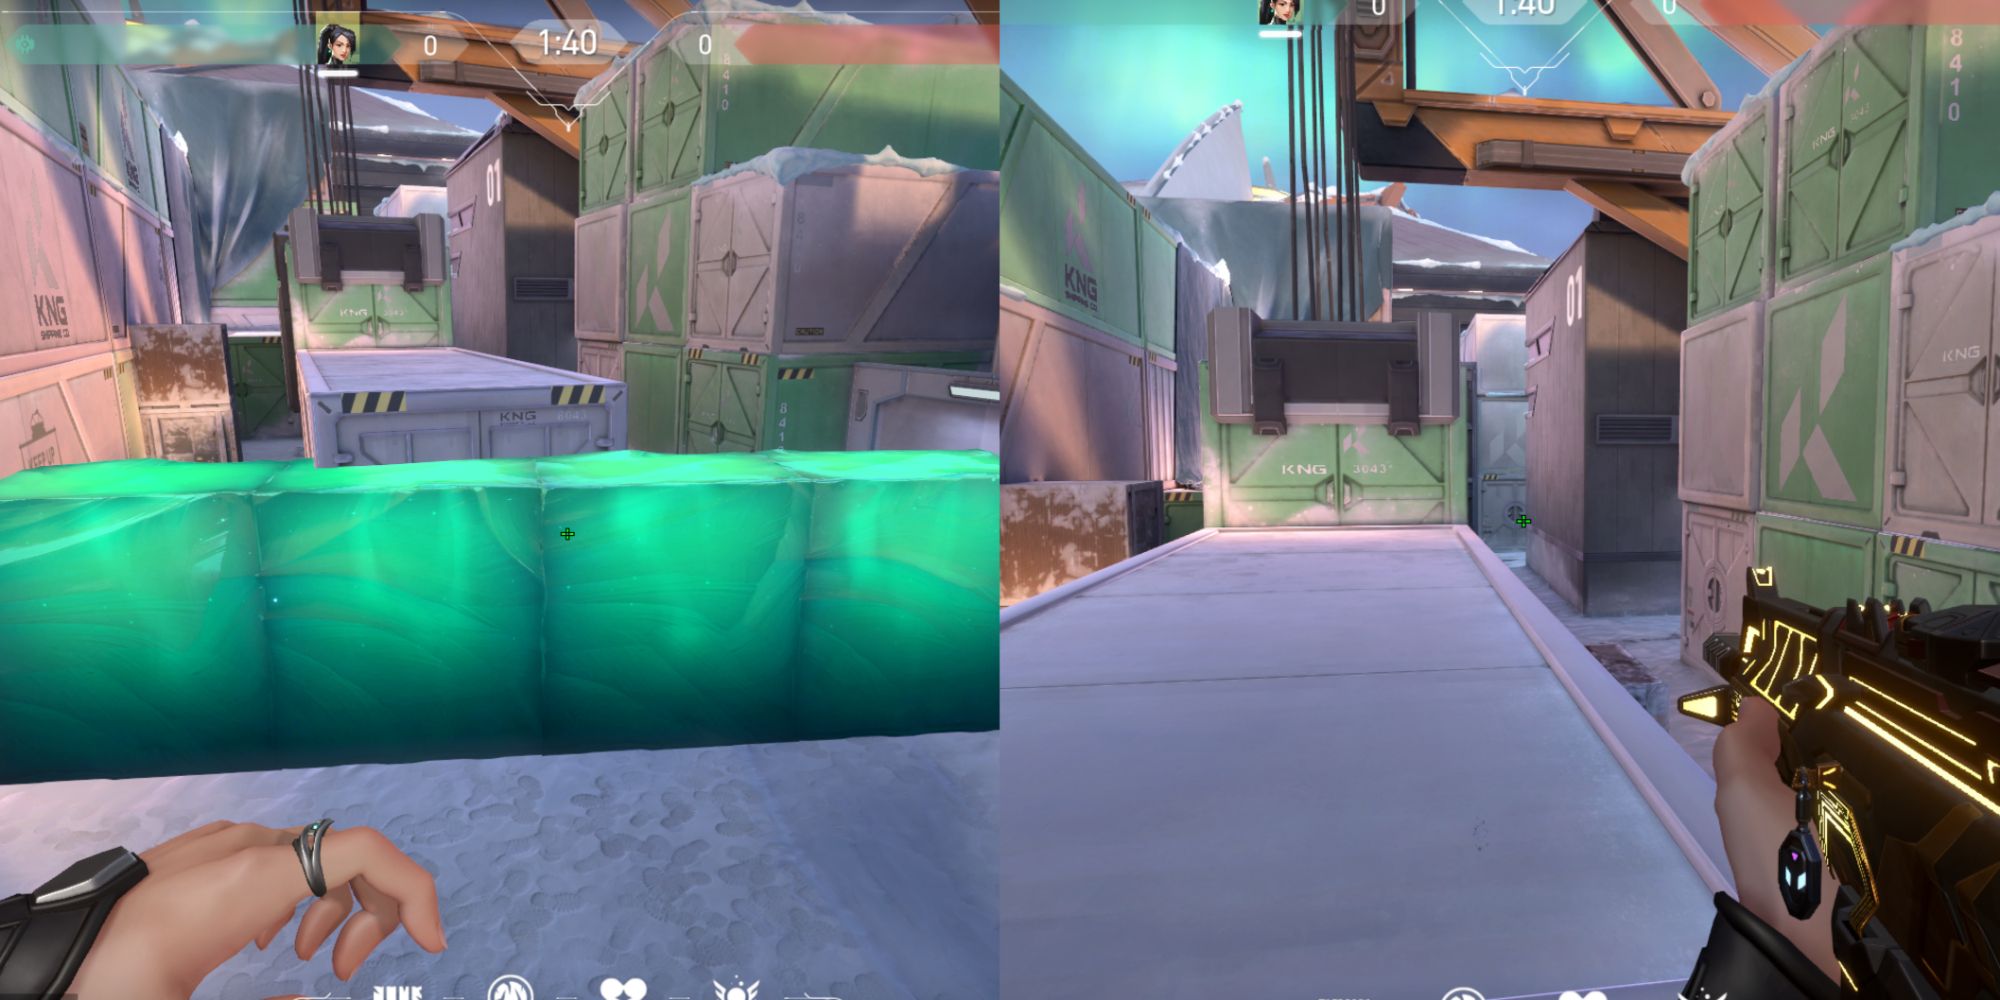 Valorant Agent Sage wall for boosting B on the map Icebox